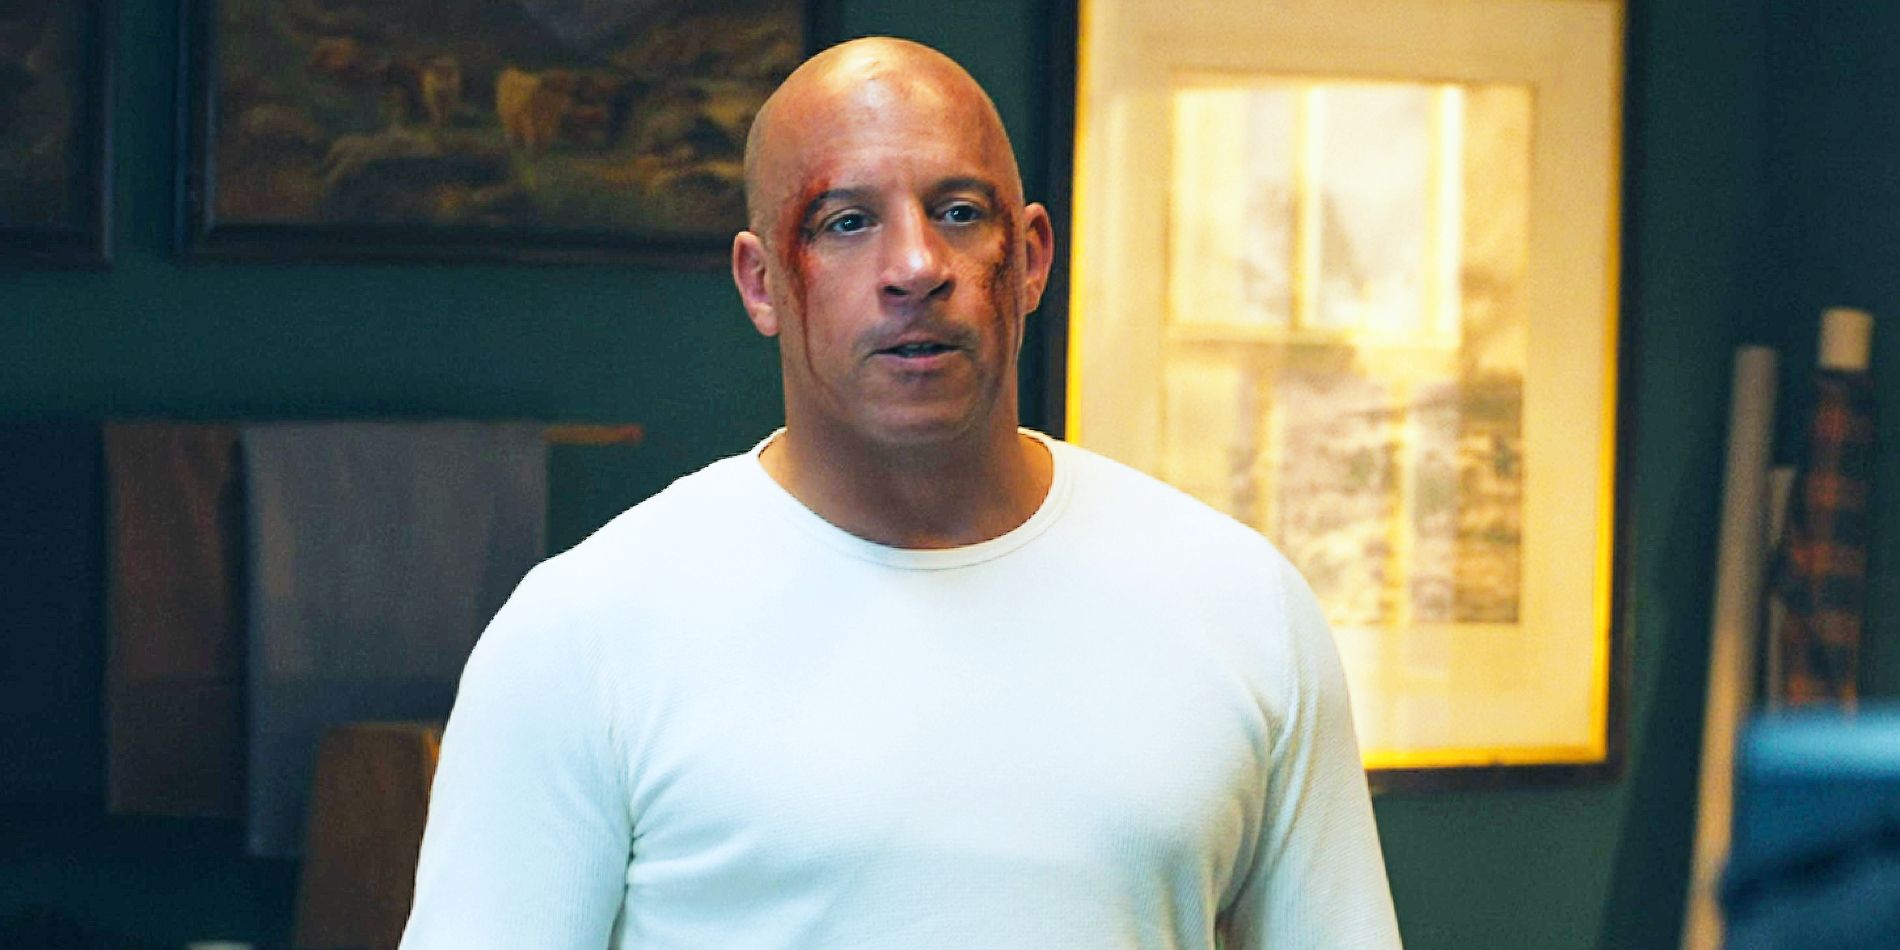 Vin Diesel As Dominic Toretto looking angry in Fast and Furious 9